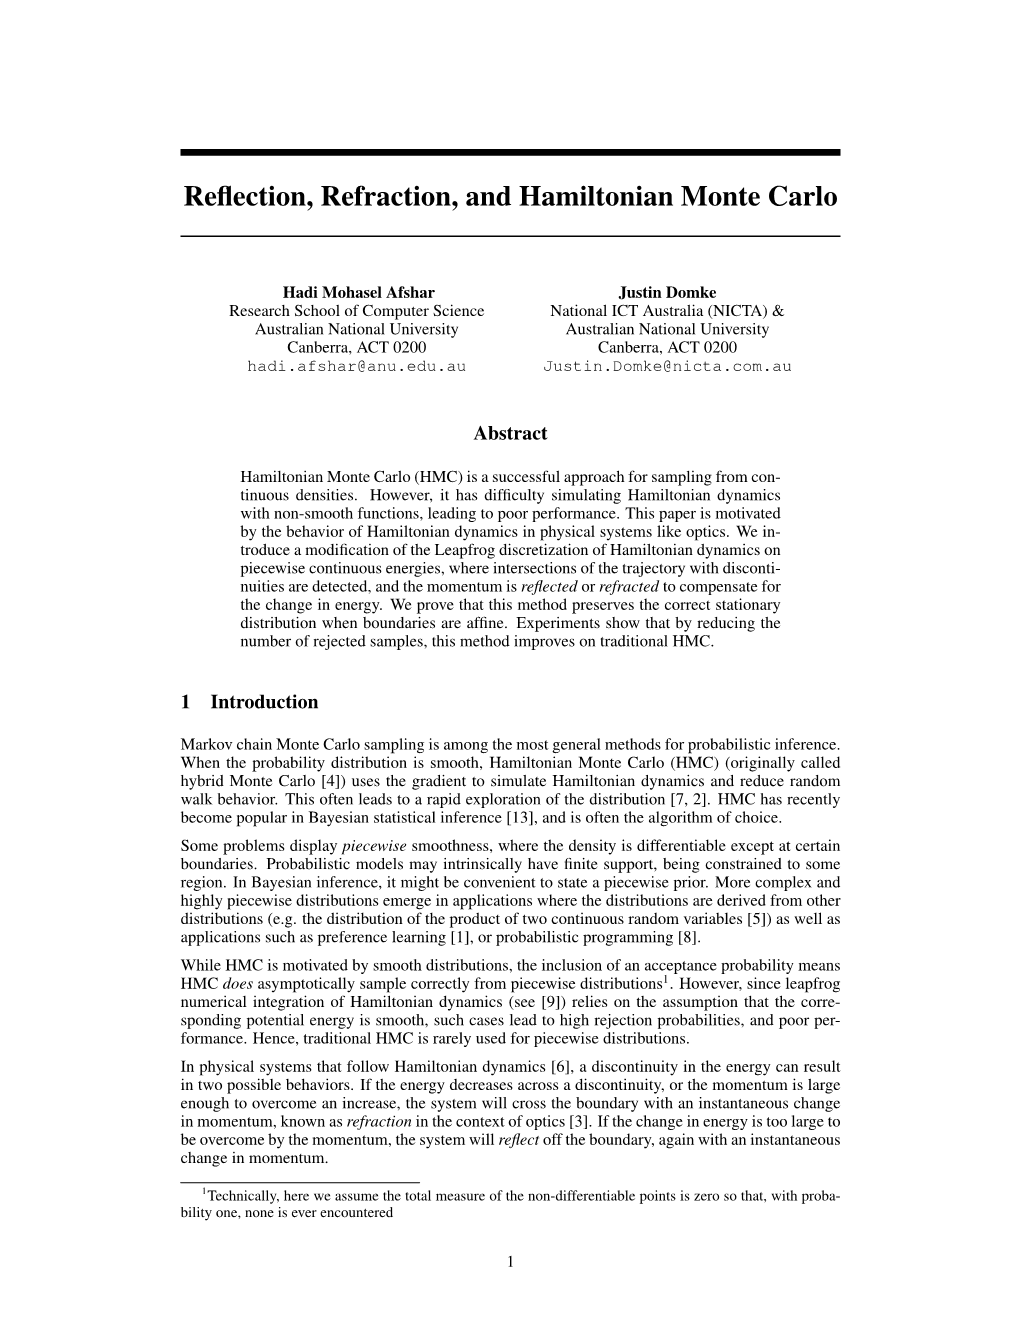 Reflection, Refraction, and Hamiltonian Monte Carlo